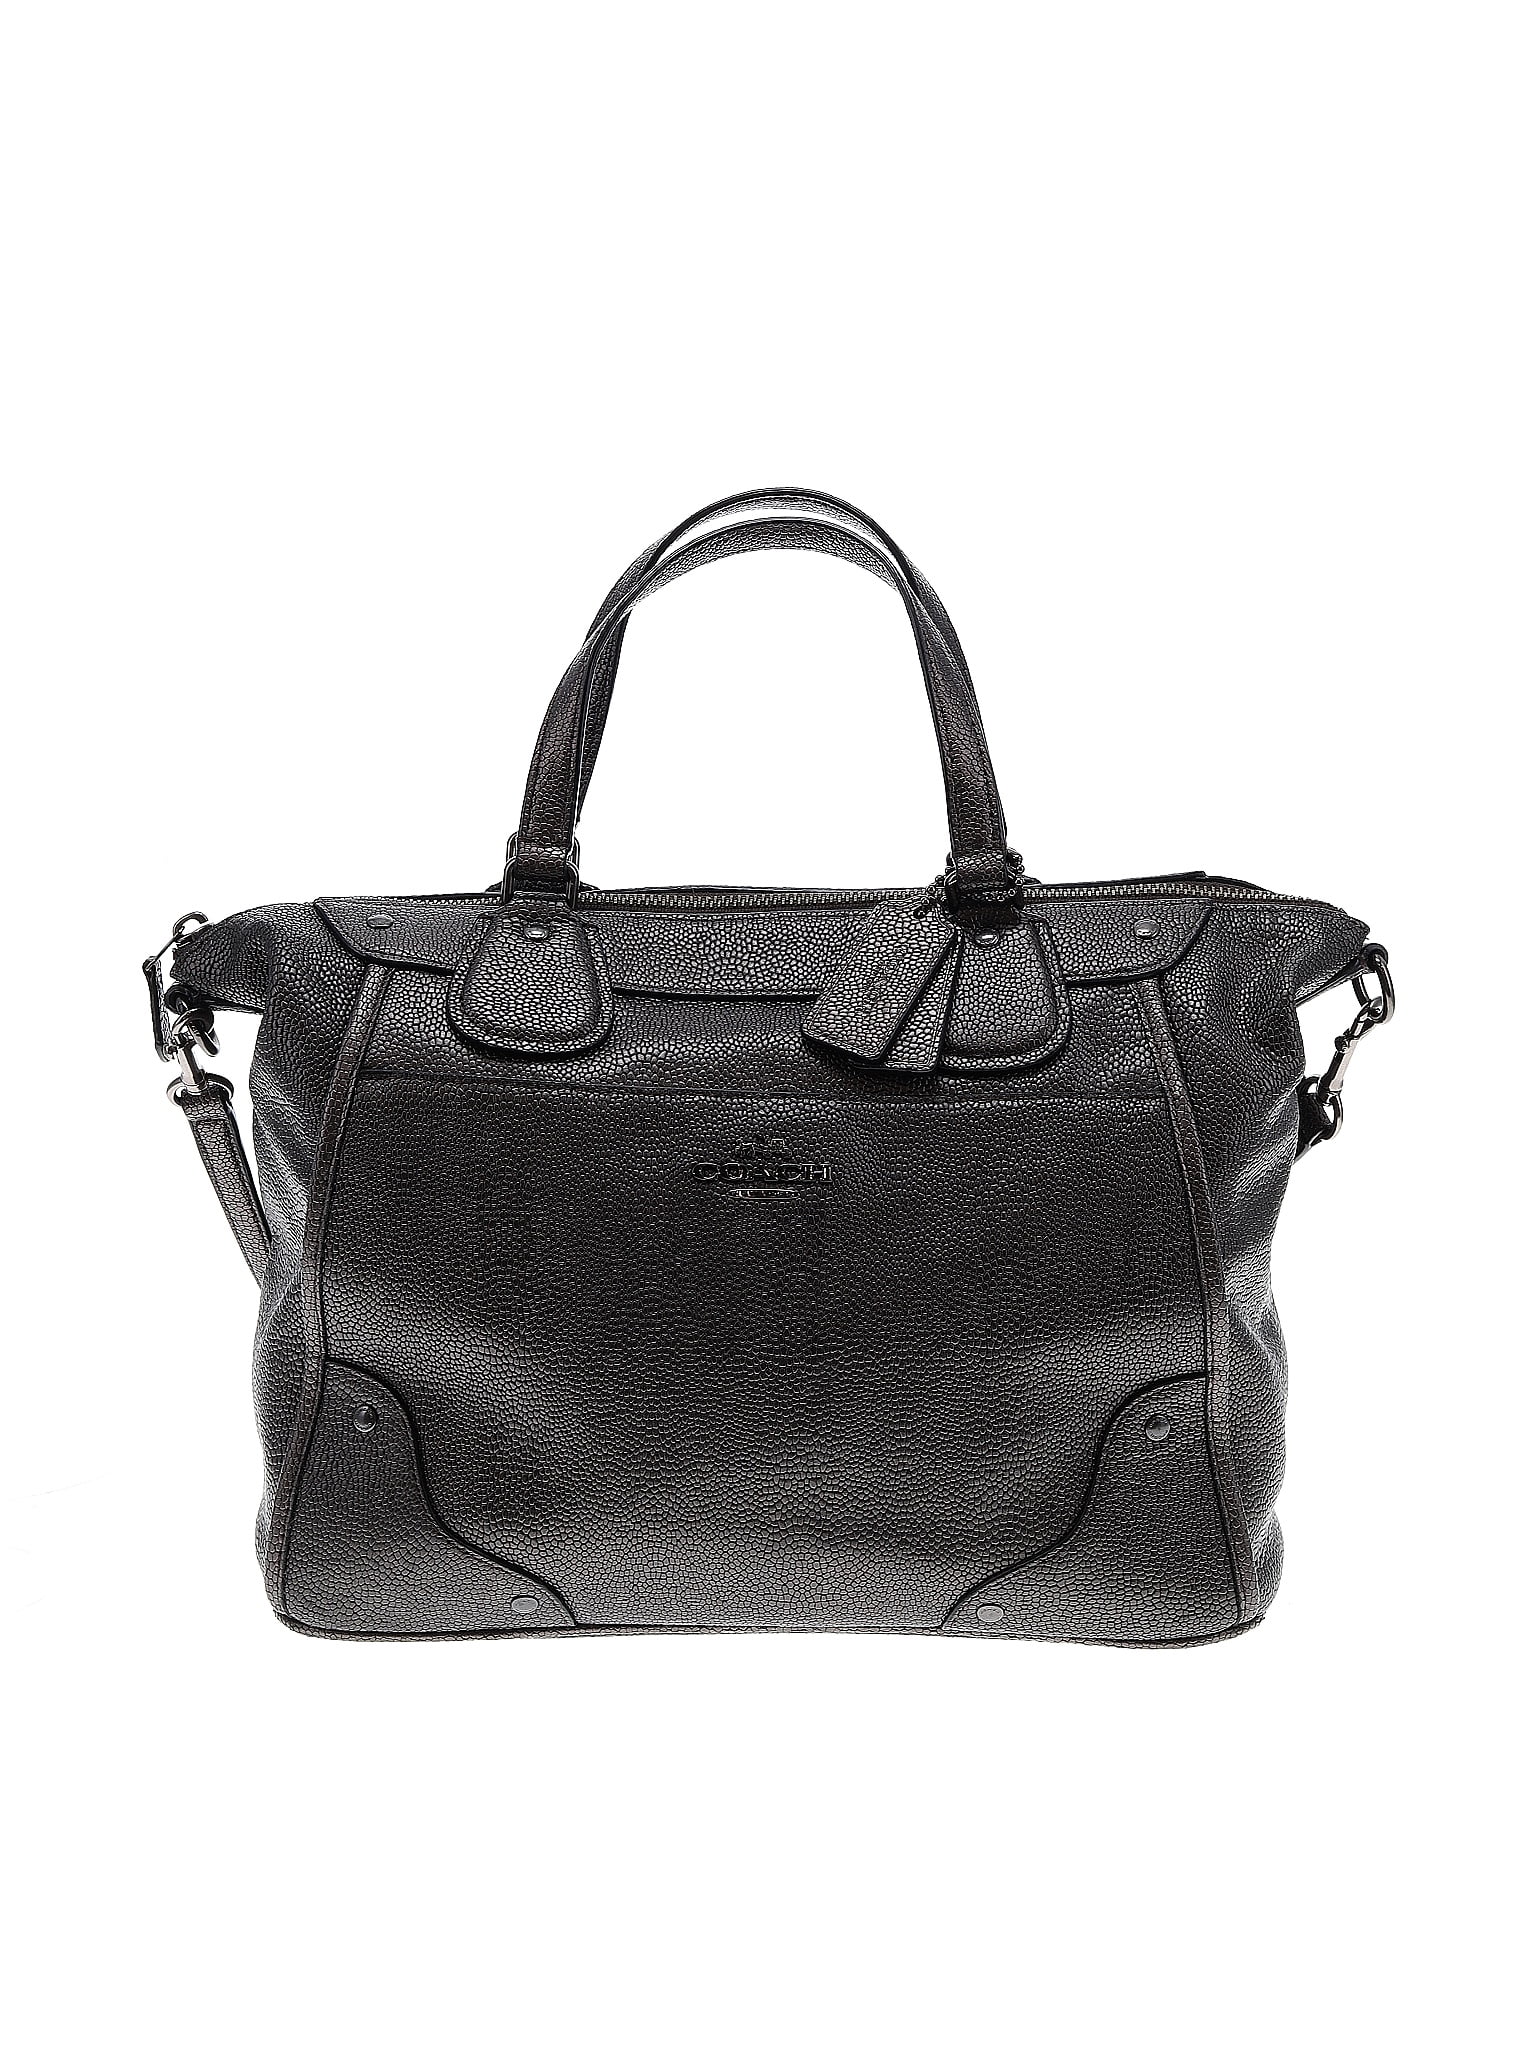 Coach Factory 100% Leather Solid Metallic Black Leather Satchel One ...